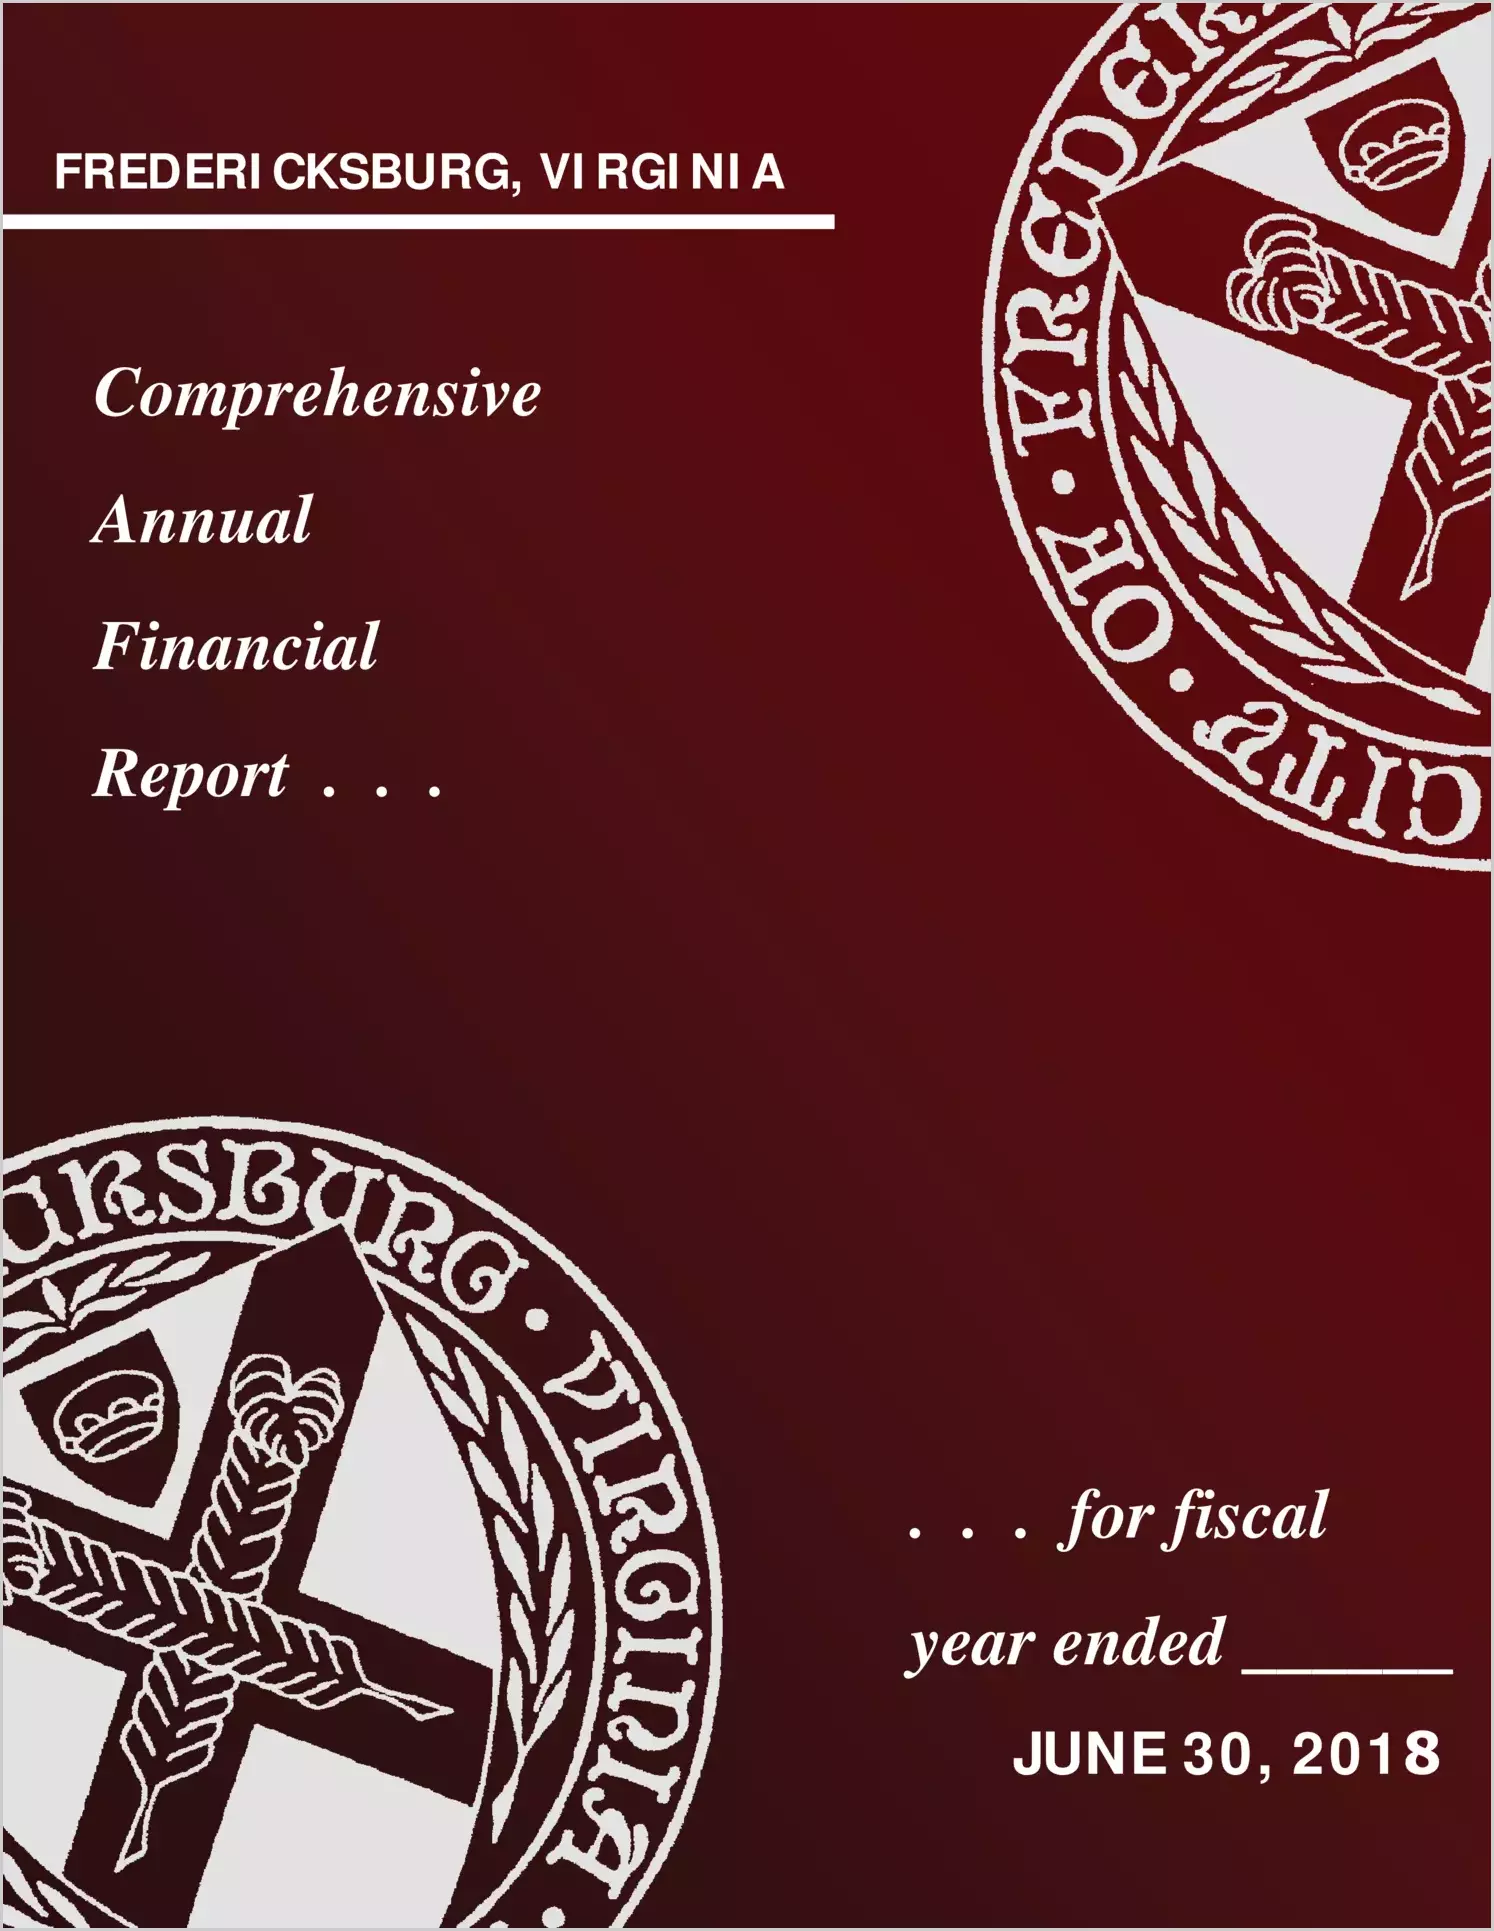 2018 Annual Financial Report for City of Fredericksburg